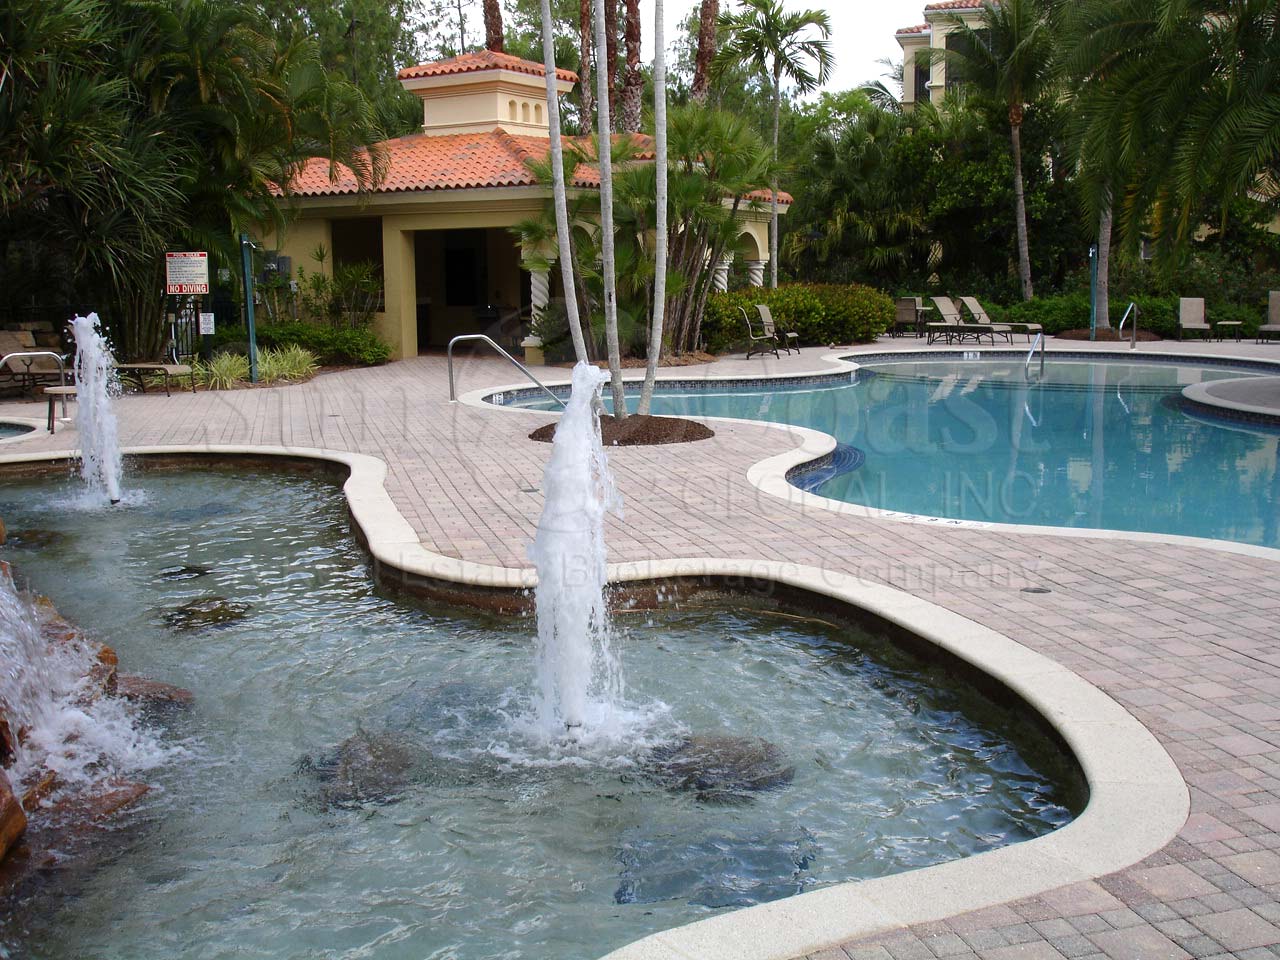 Castillo Community Pool, Waterfall and Fountain